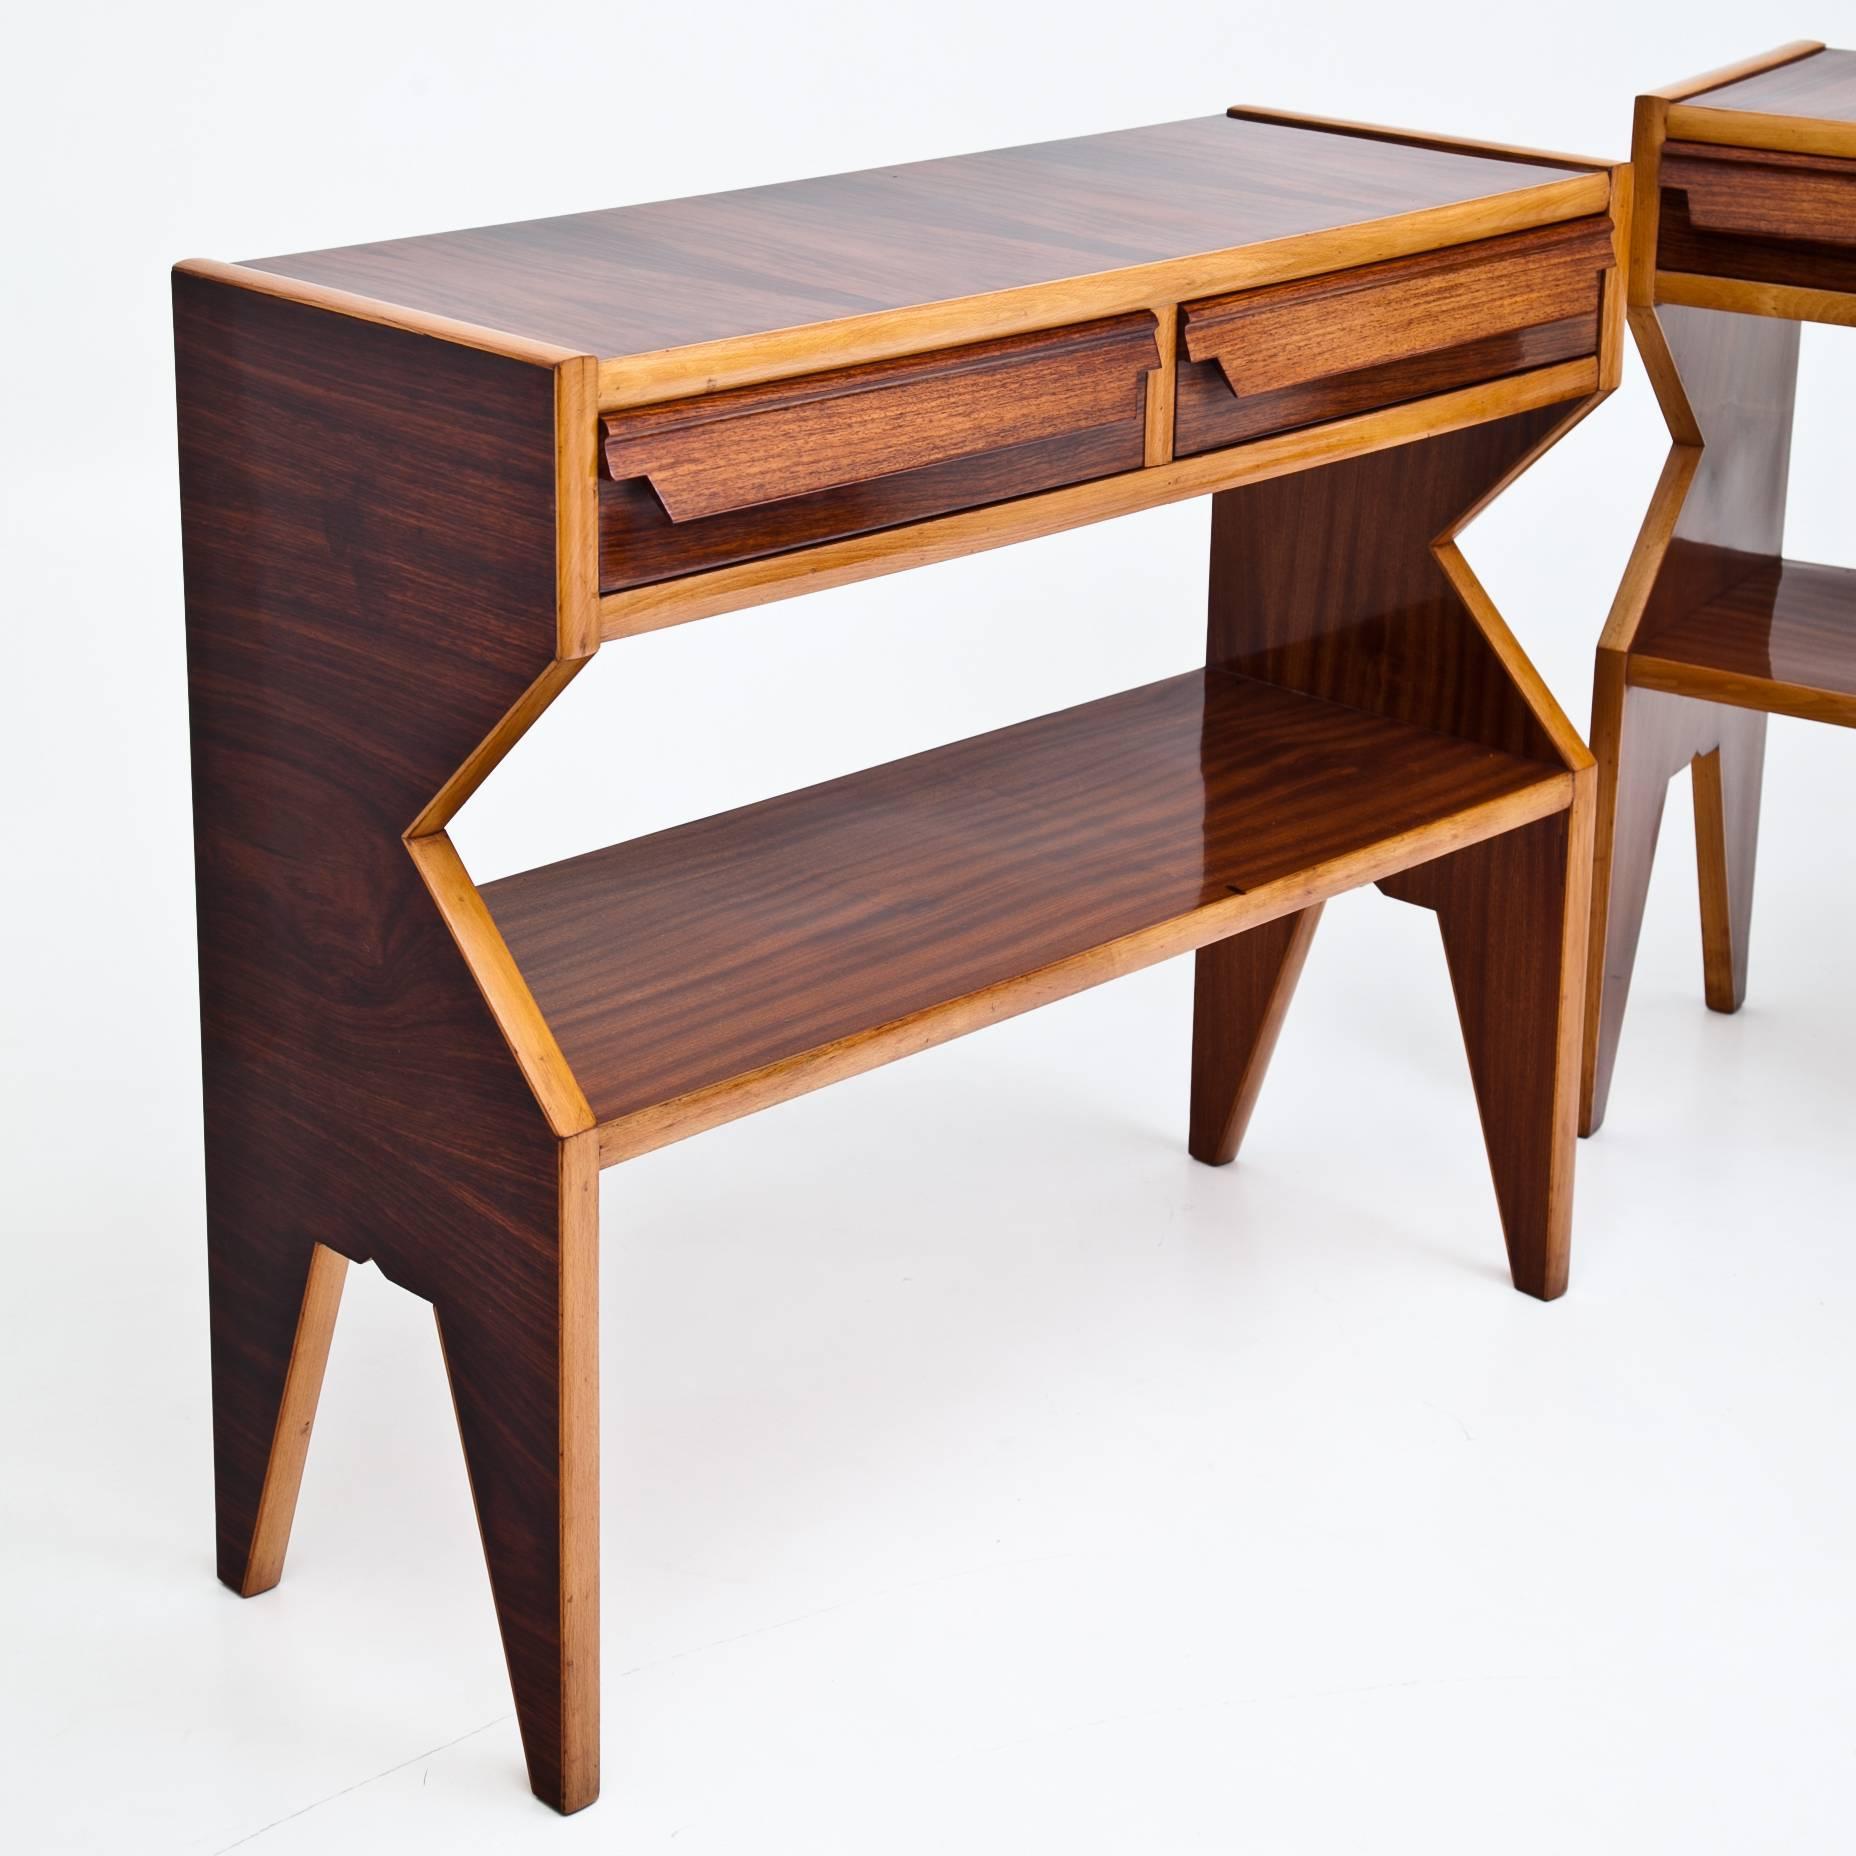 Pair of Italian console tables with an unusual profile, two drawers and one shelf. The consoles were professionally refurbished and polished.